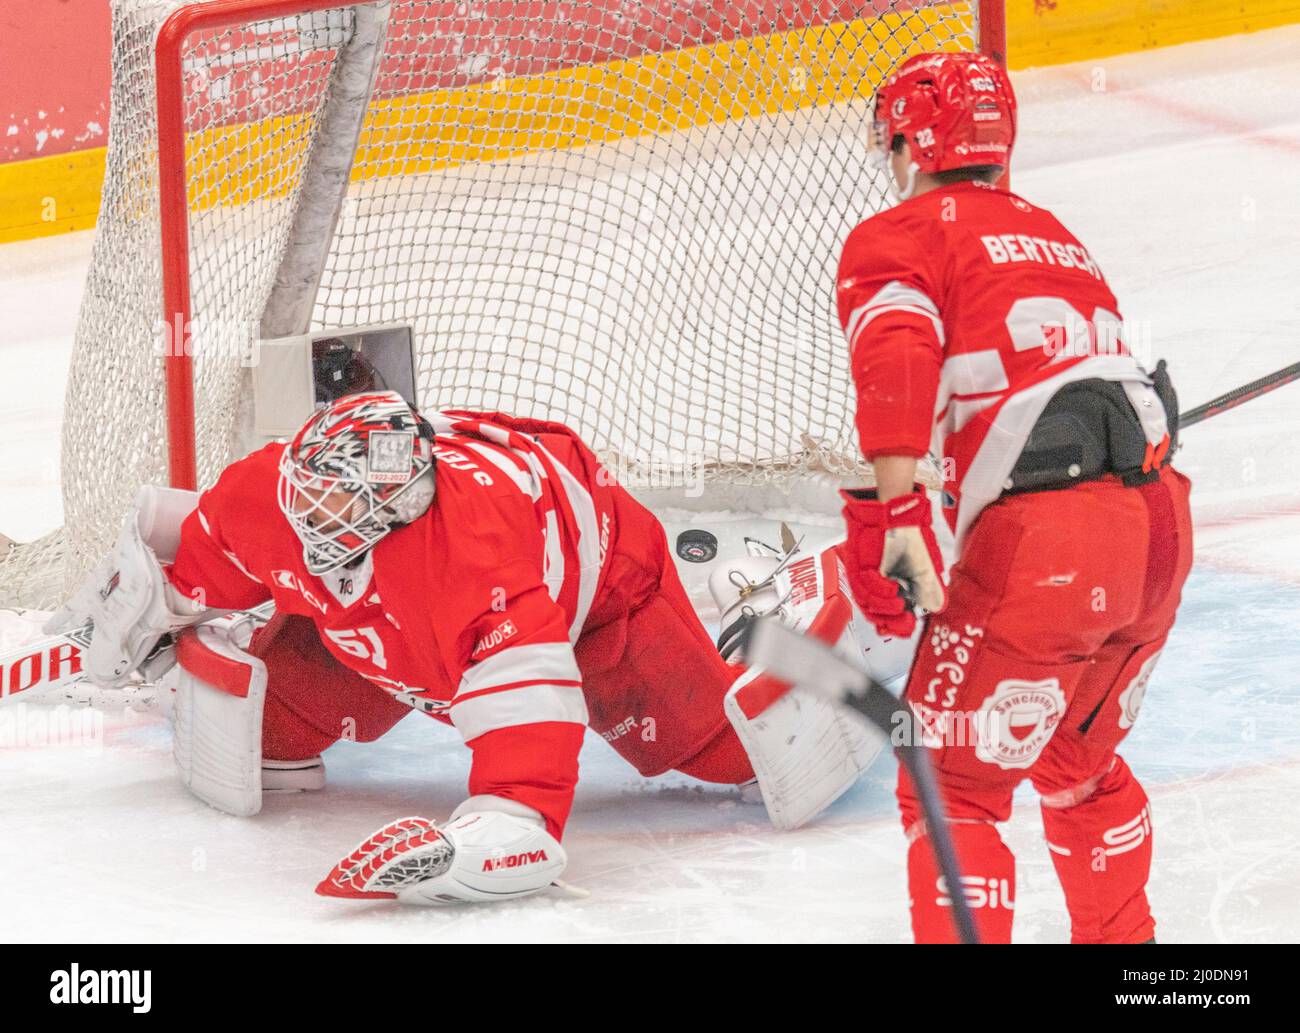 Lausanne, Vaudoise Arena, Switzerland. 18th Mar, 2022: Tobias Stephan (goalkeeper) of Lausanne Hc (51) concedes a goal during the Pre-playoffs, Acte 1 of the 2021-2022 Swiss National League Season with the Lausanne HC and HC Ambri-Piotta. Credit: Eric Dubost/Alamy Live News Stock Photo